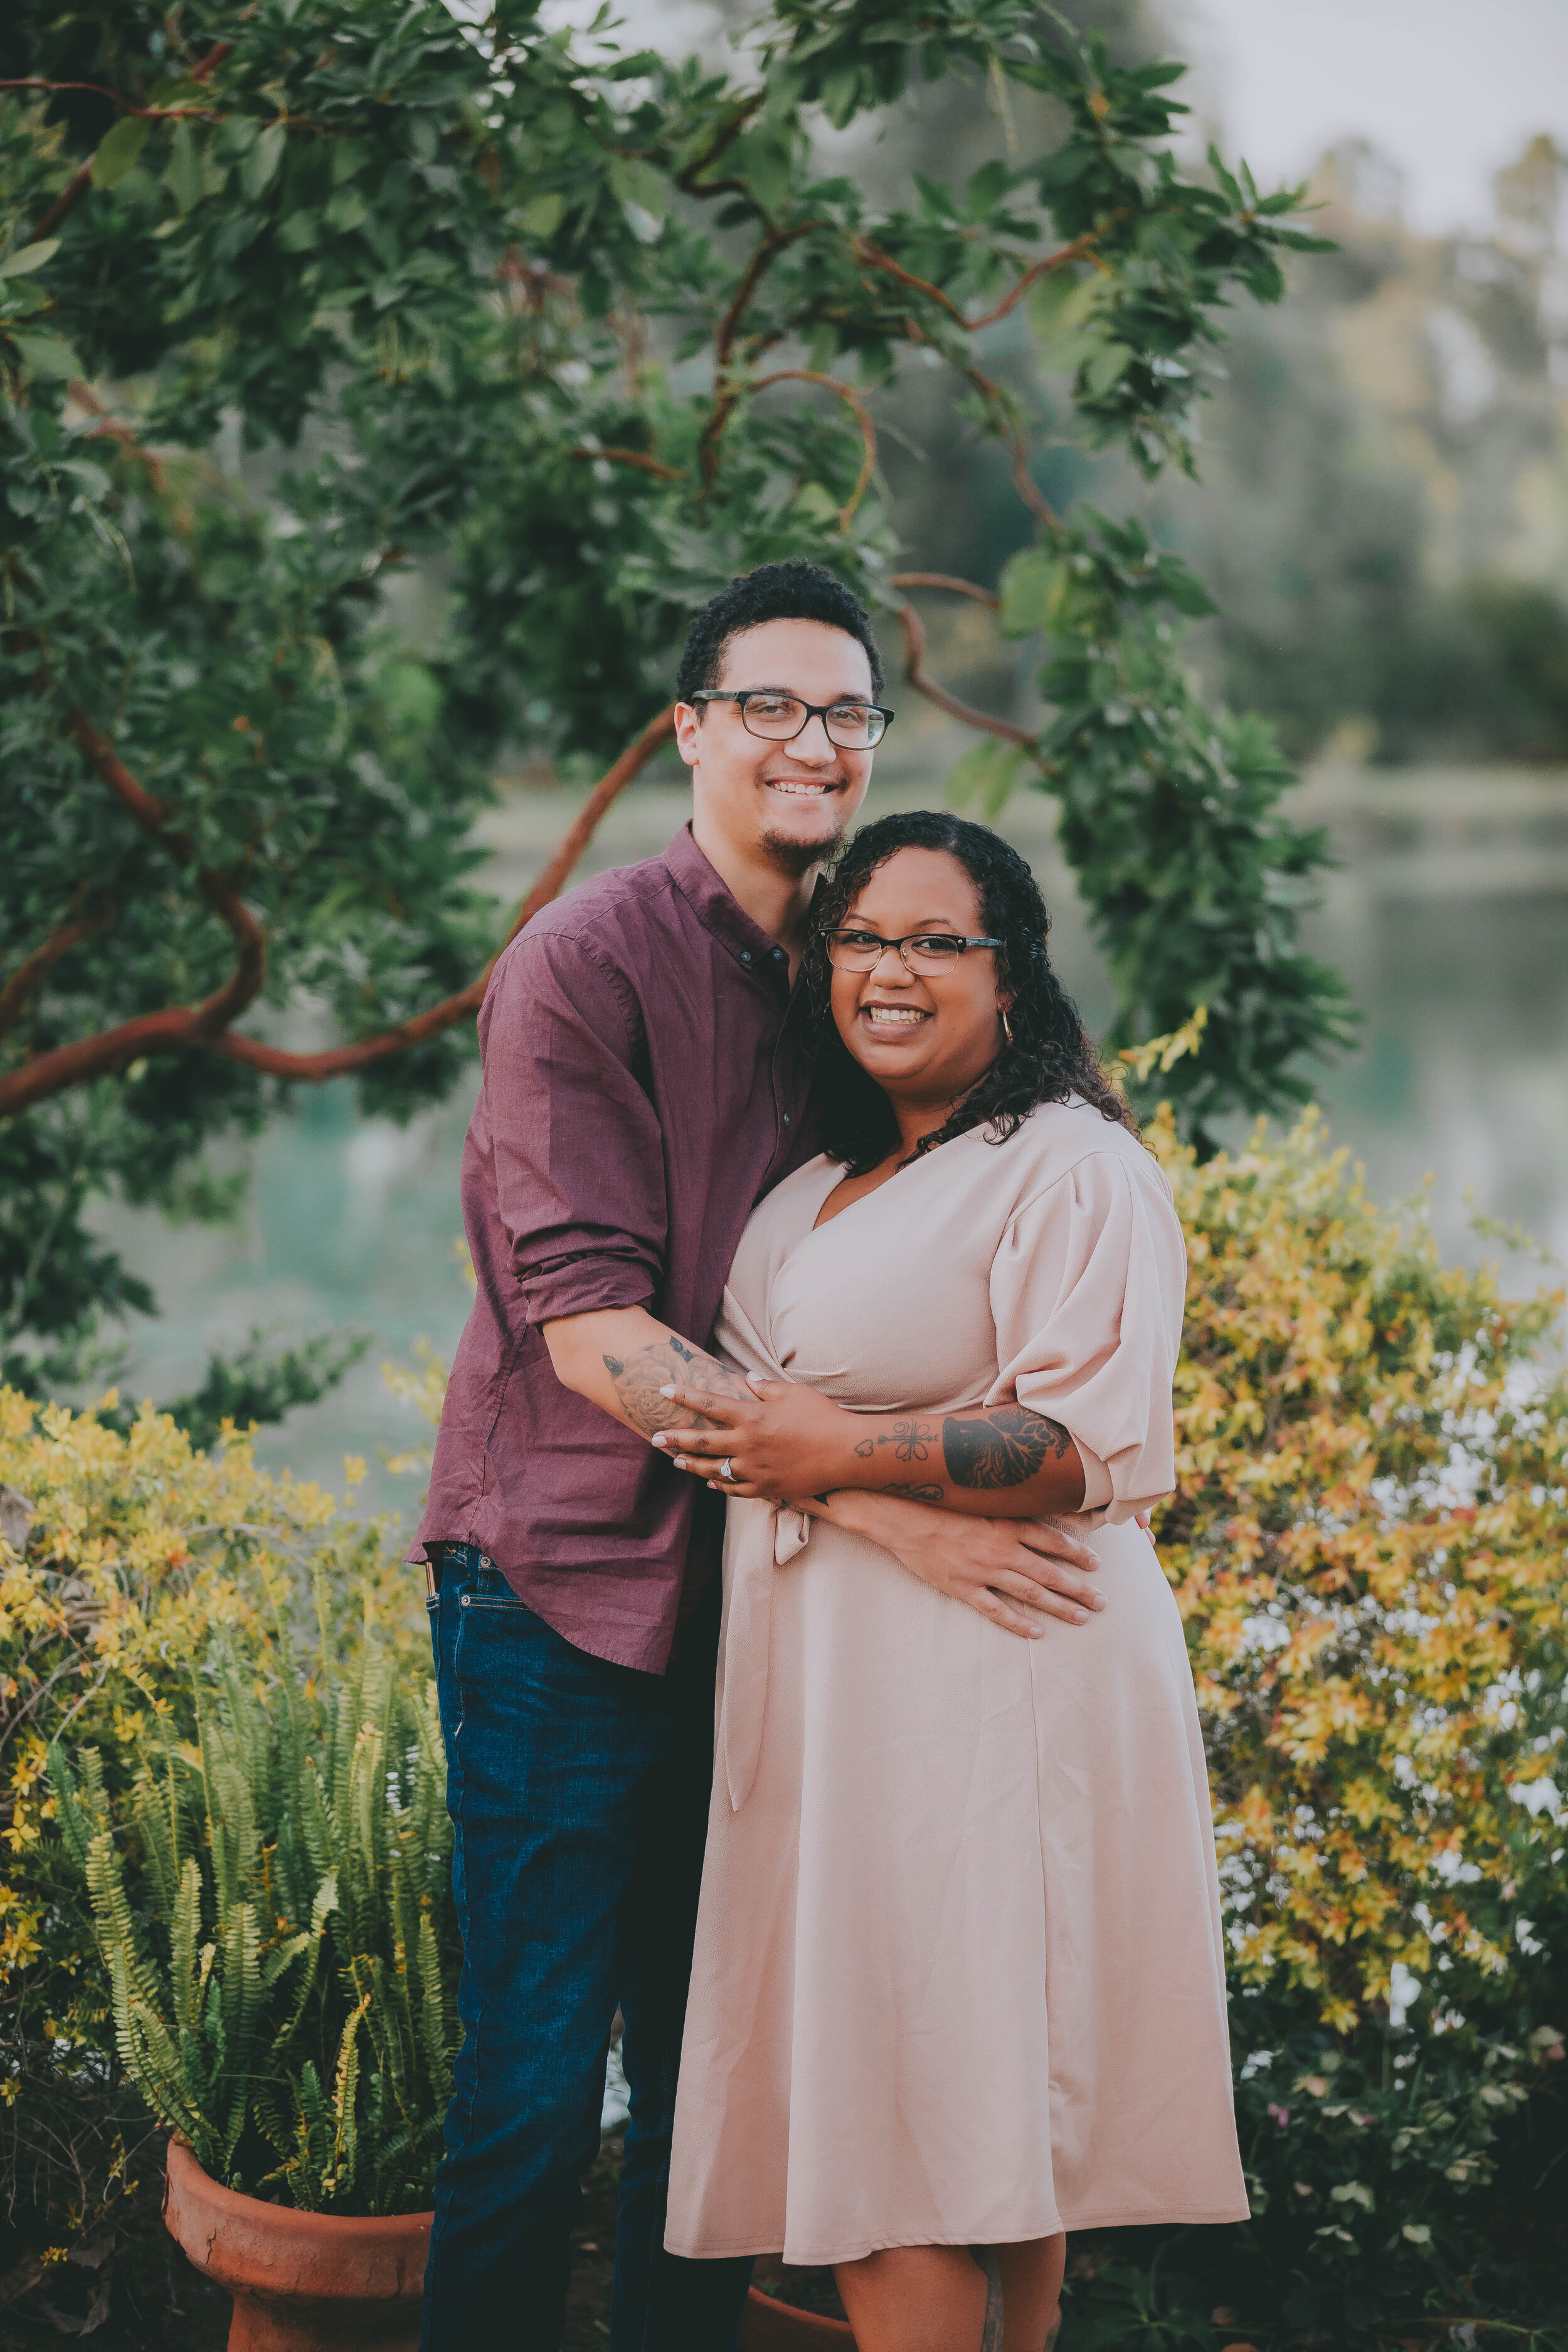 Fresno Engagament Photos - Wolf Lakes - The Clausen Gallery - Aleksis and Scott -9.jpg